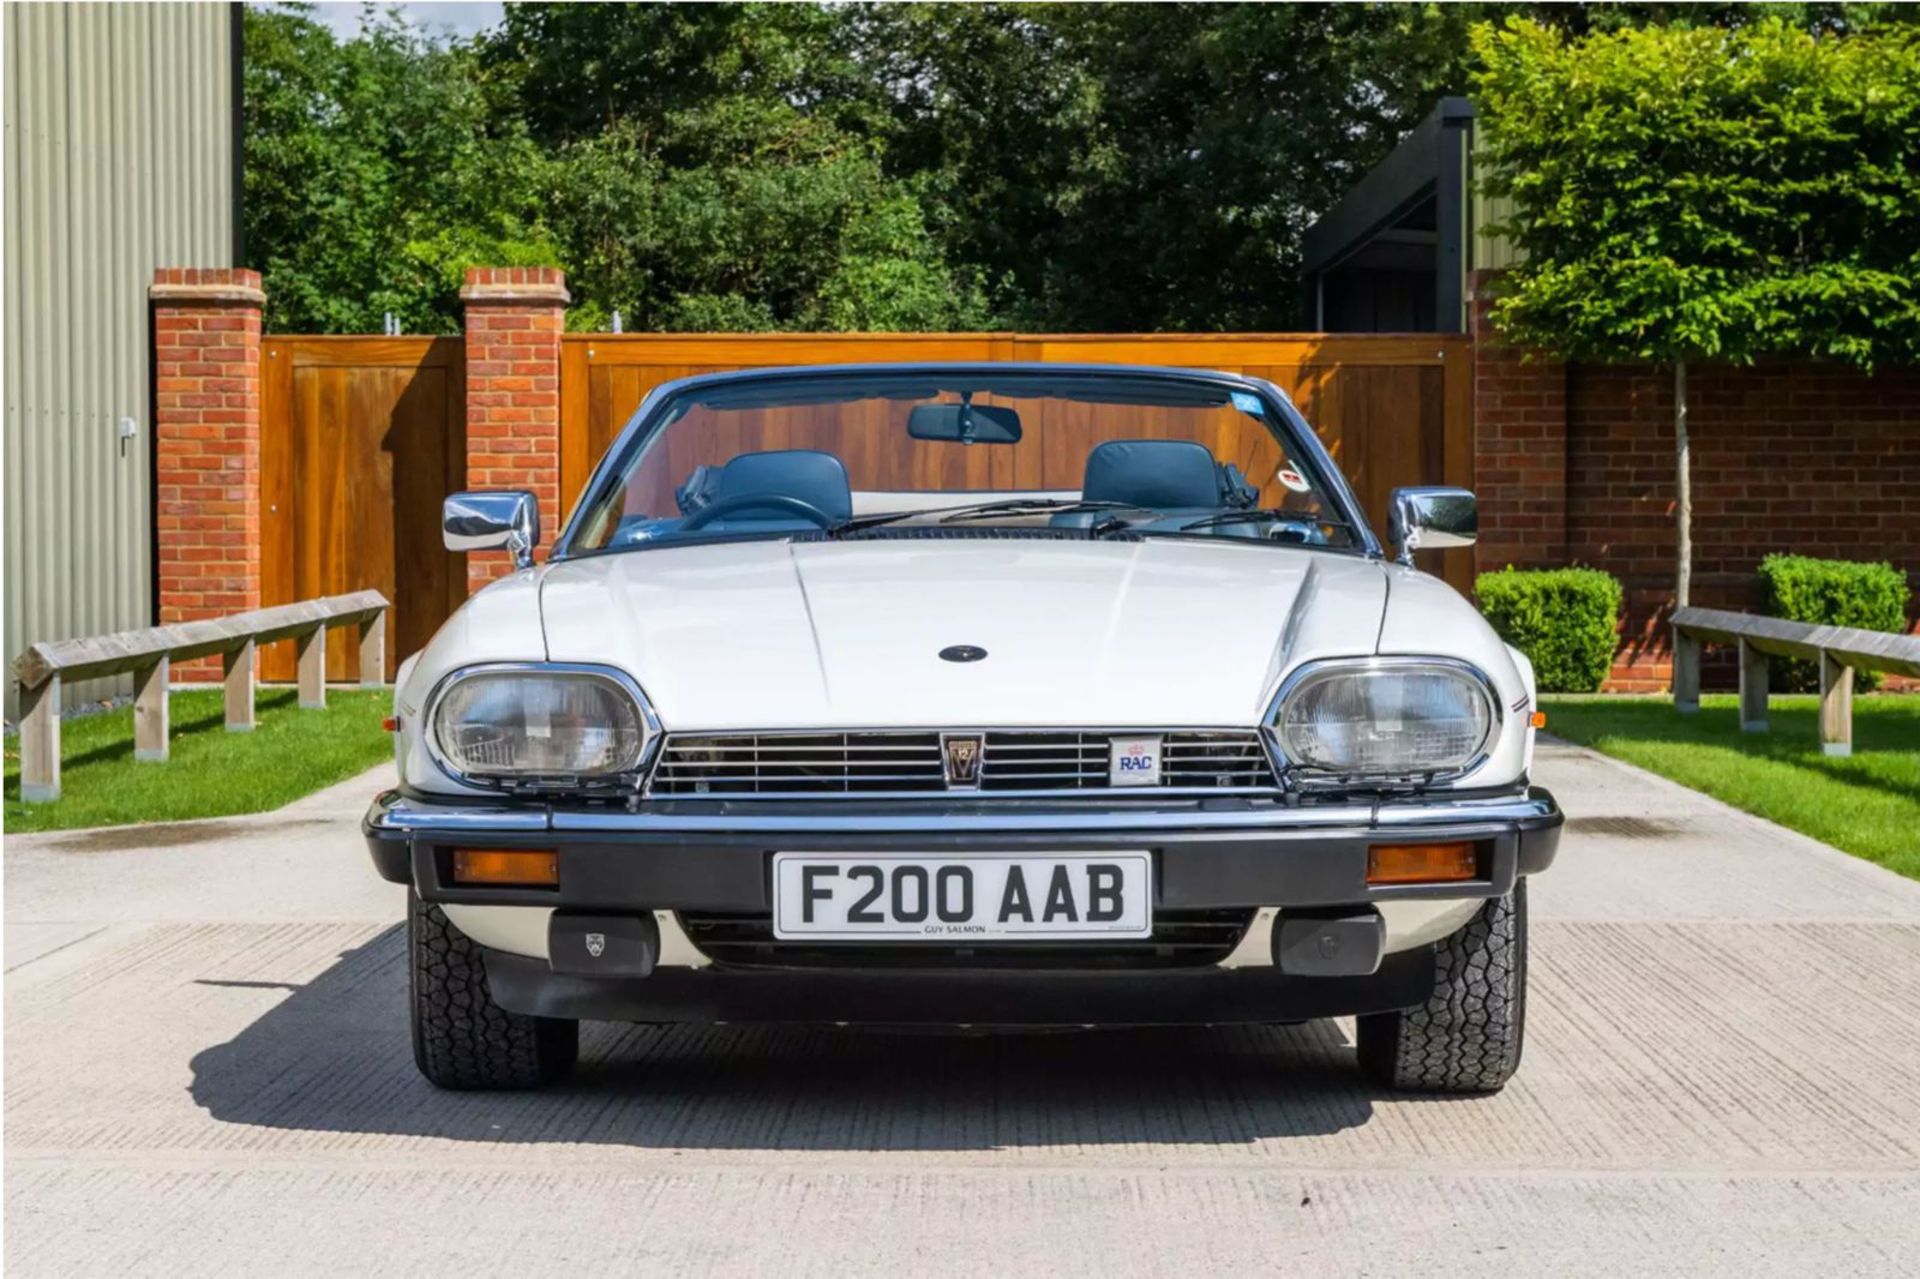 Jaguar XJ-S Convertible 1989. Just 19800 miles from new! - Image 4 of 10